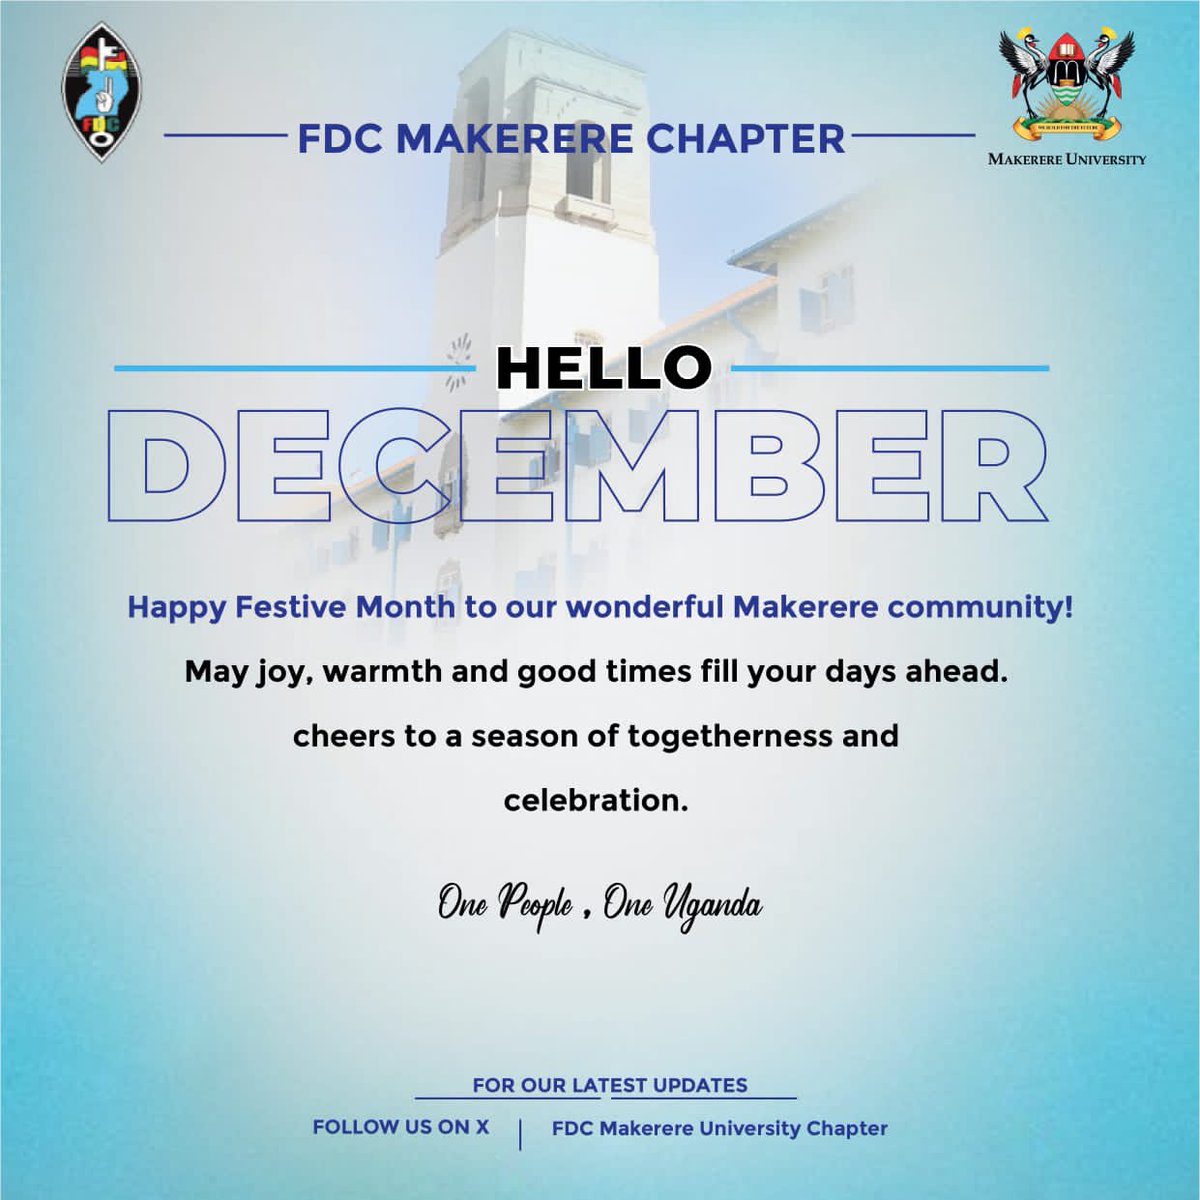 December is here! Happy new month to y'all. Makerere FDC chapter wishes you well💙✌️
@Makerere @makinterface @MakerereNews @MakSPH @MakCAES